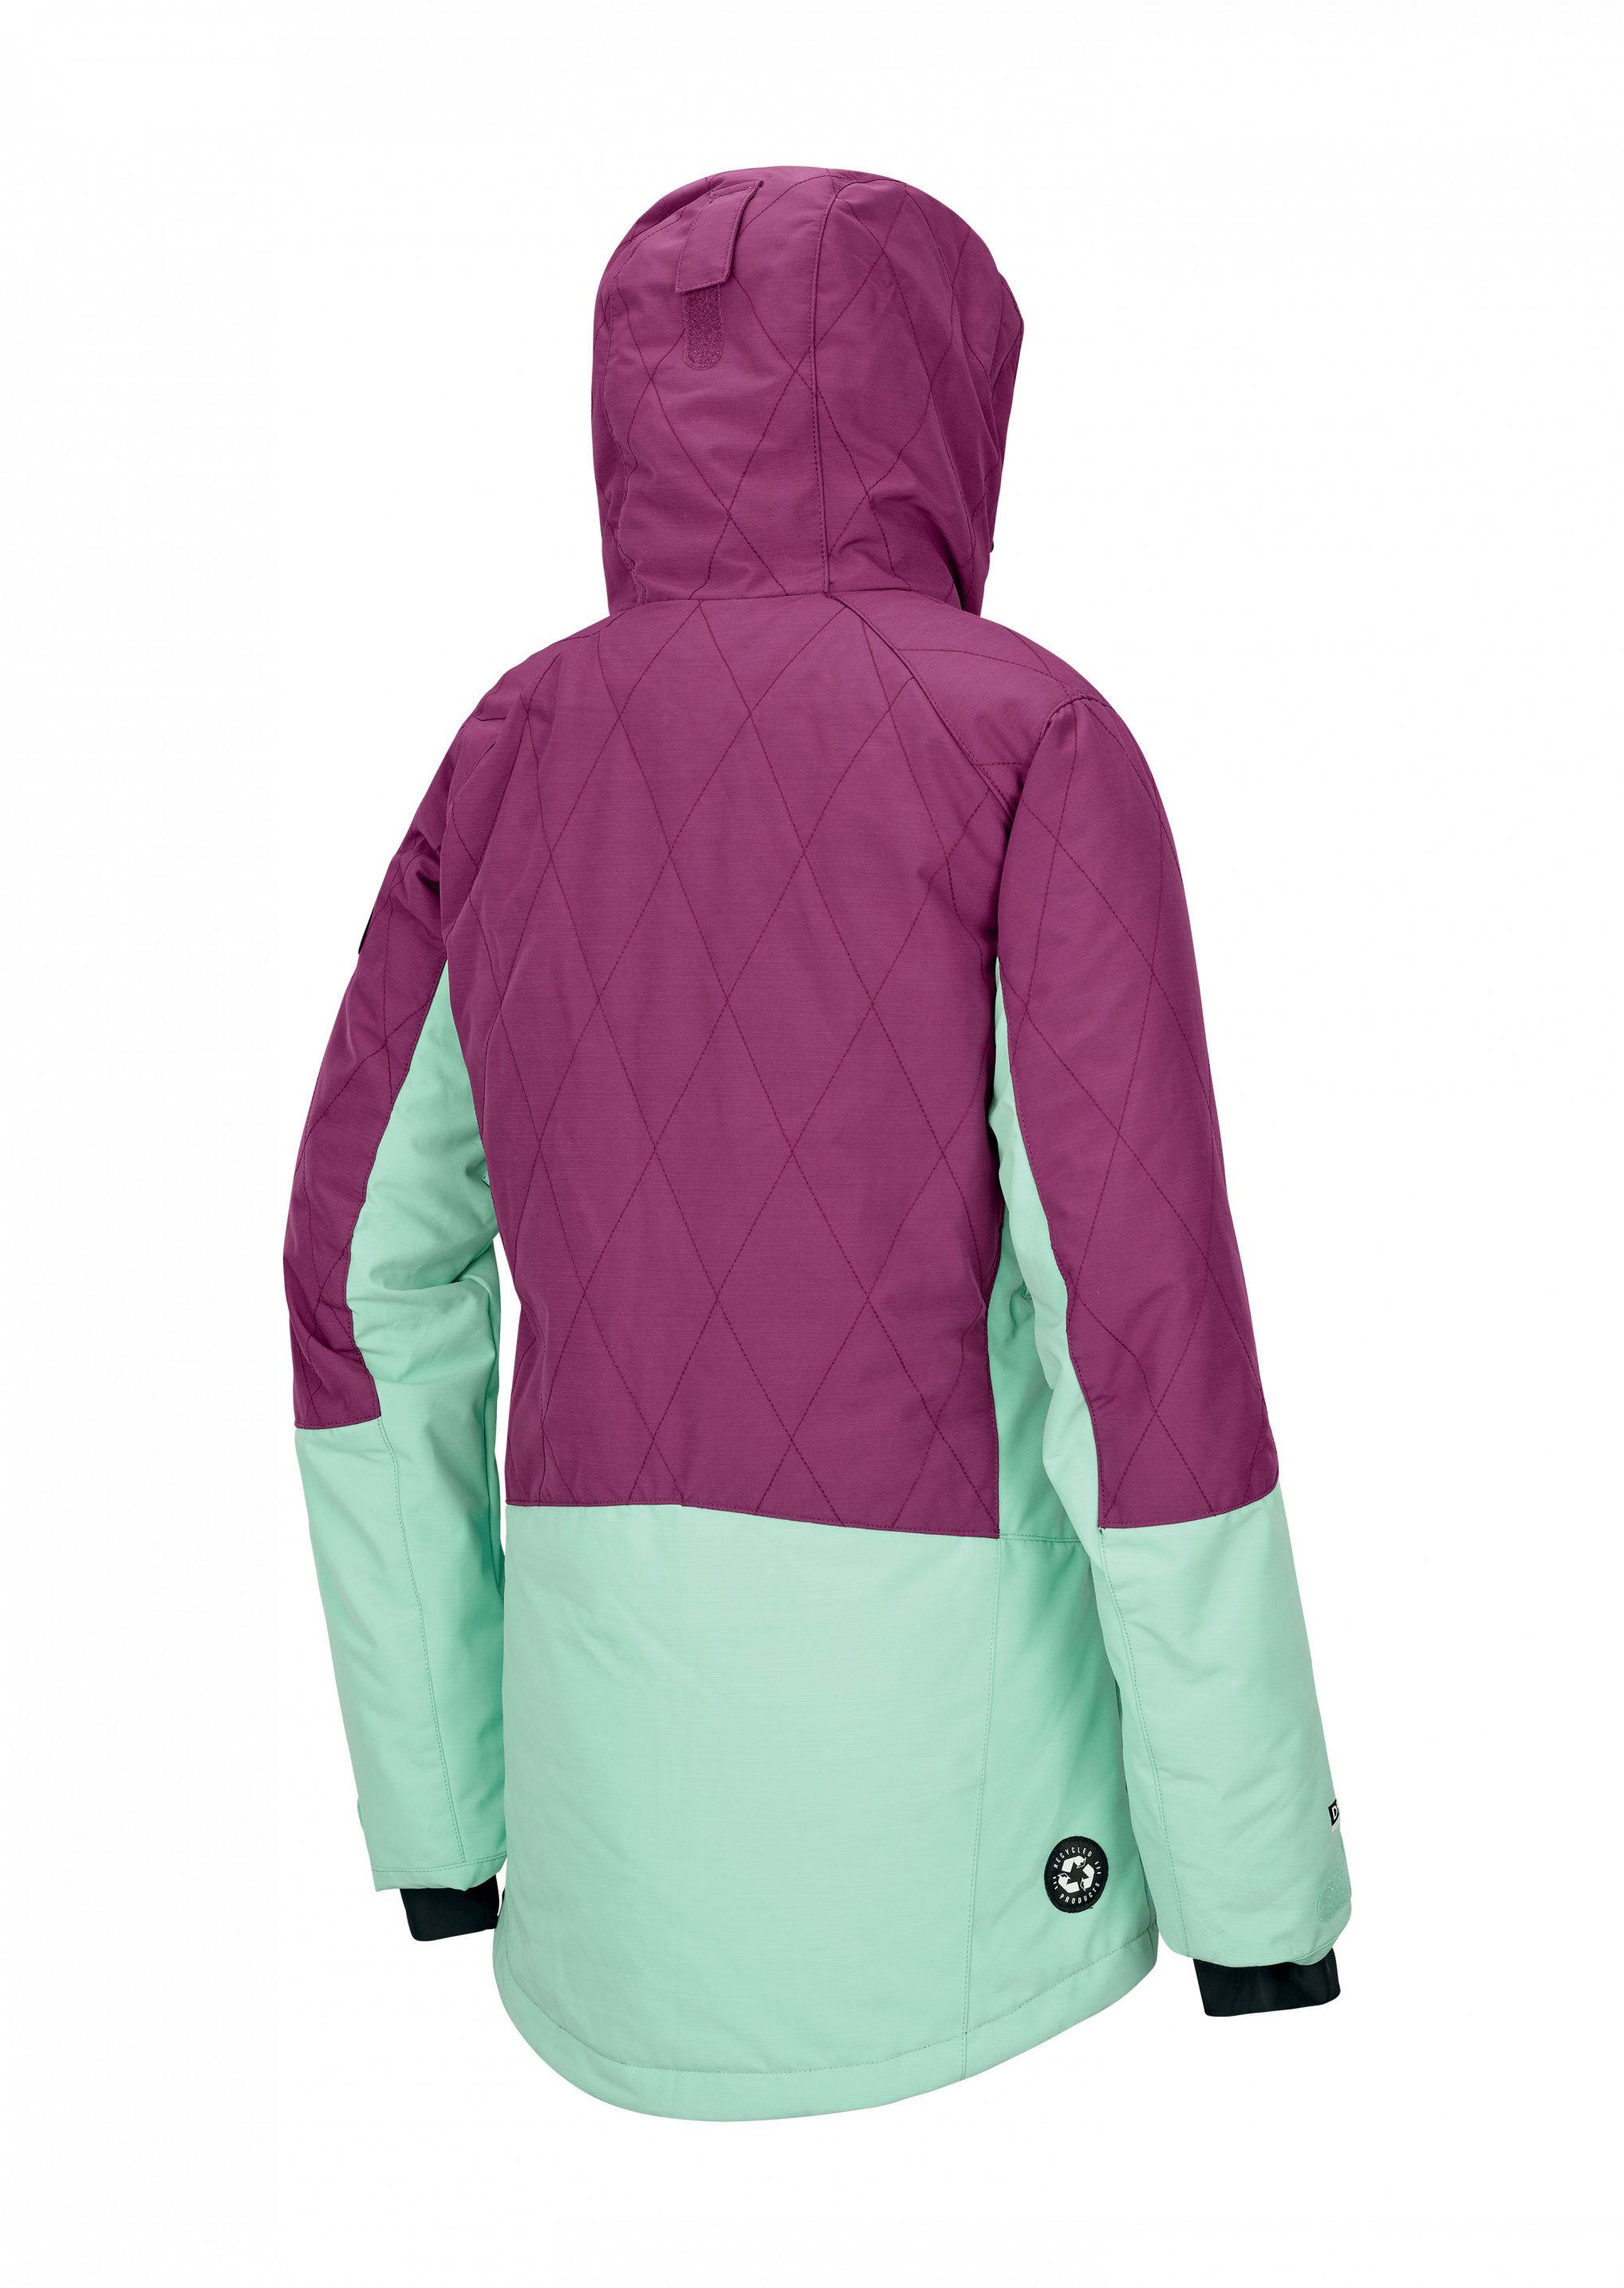 Picture Organic Clothing Mineral Jacket Women’s Raspberry XL